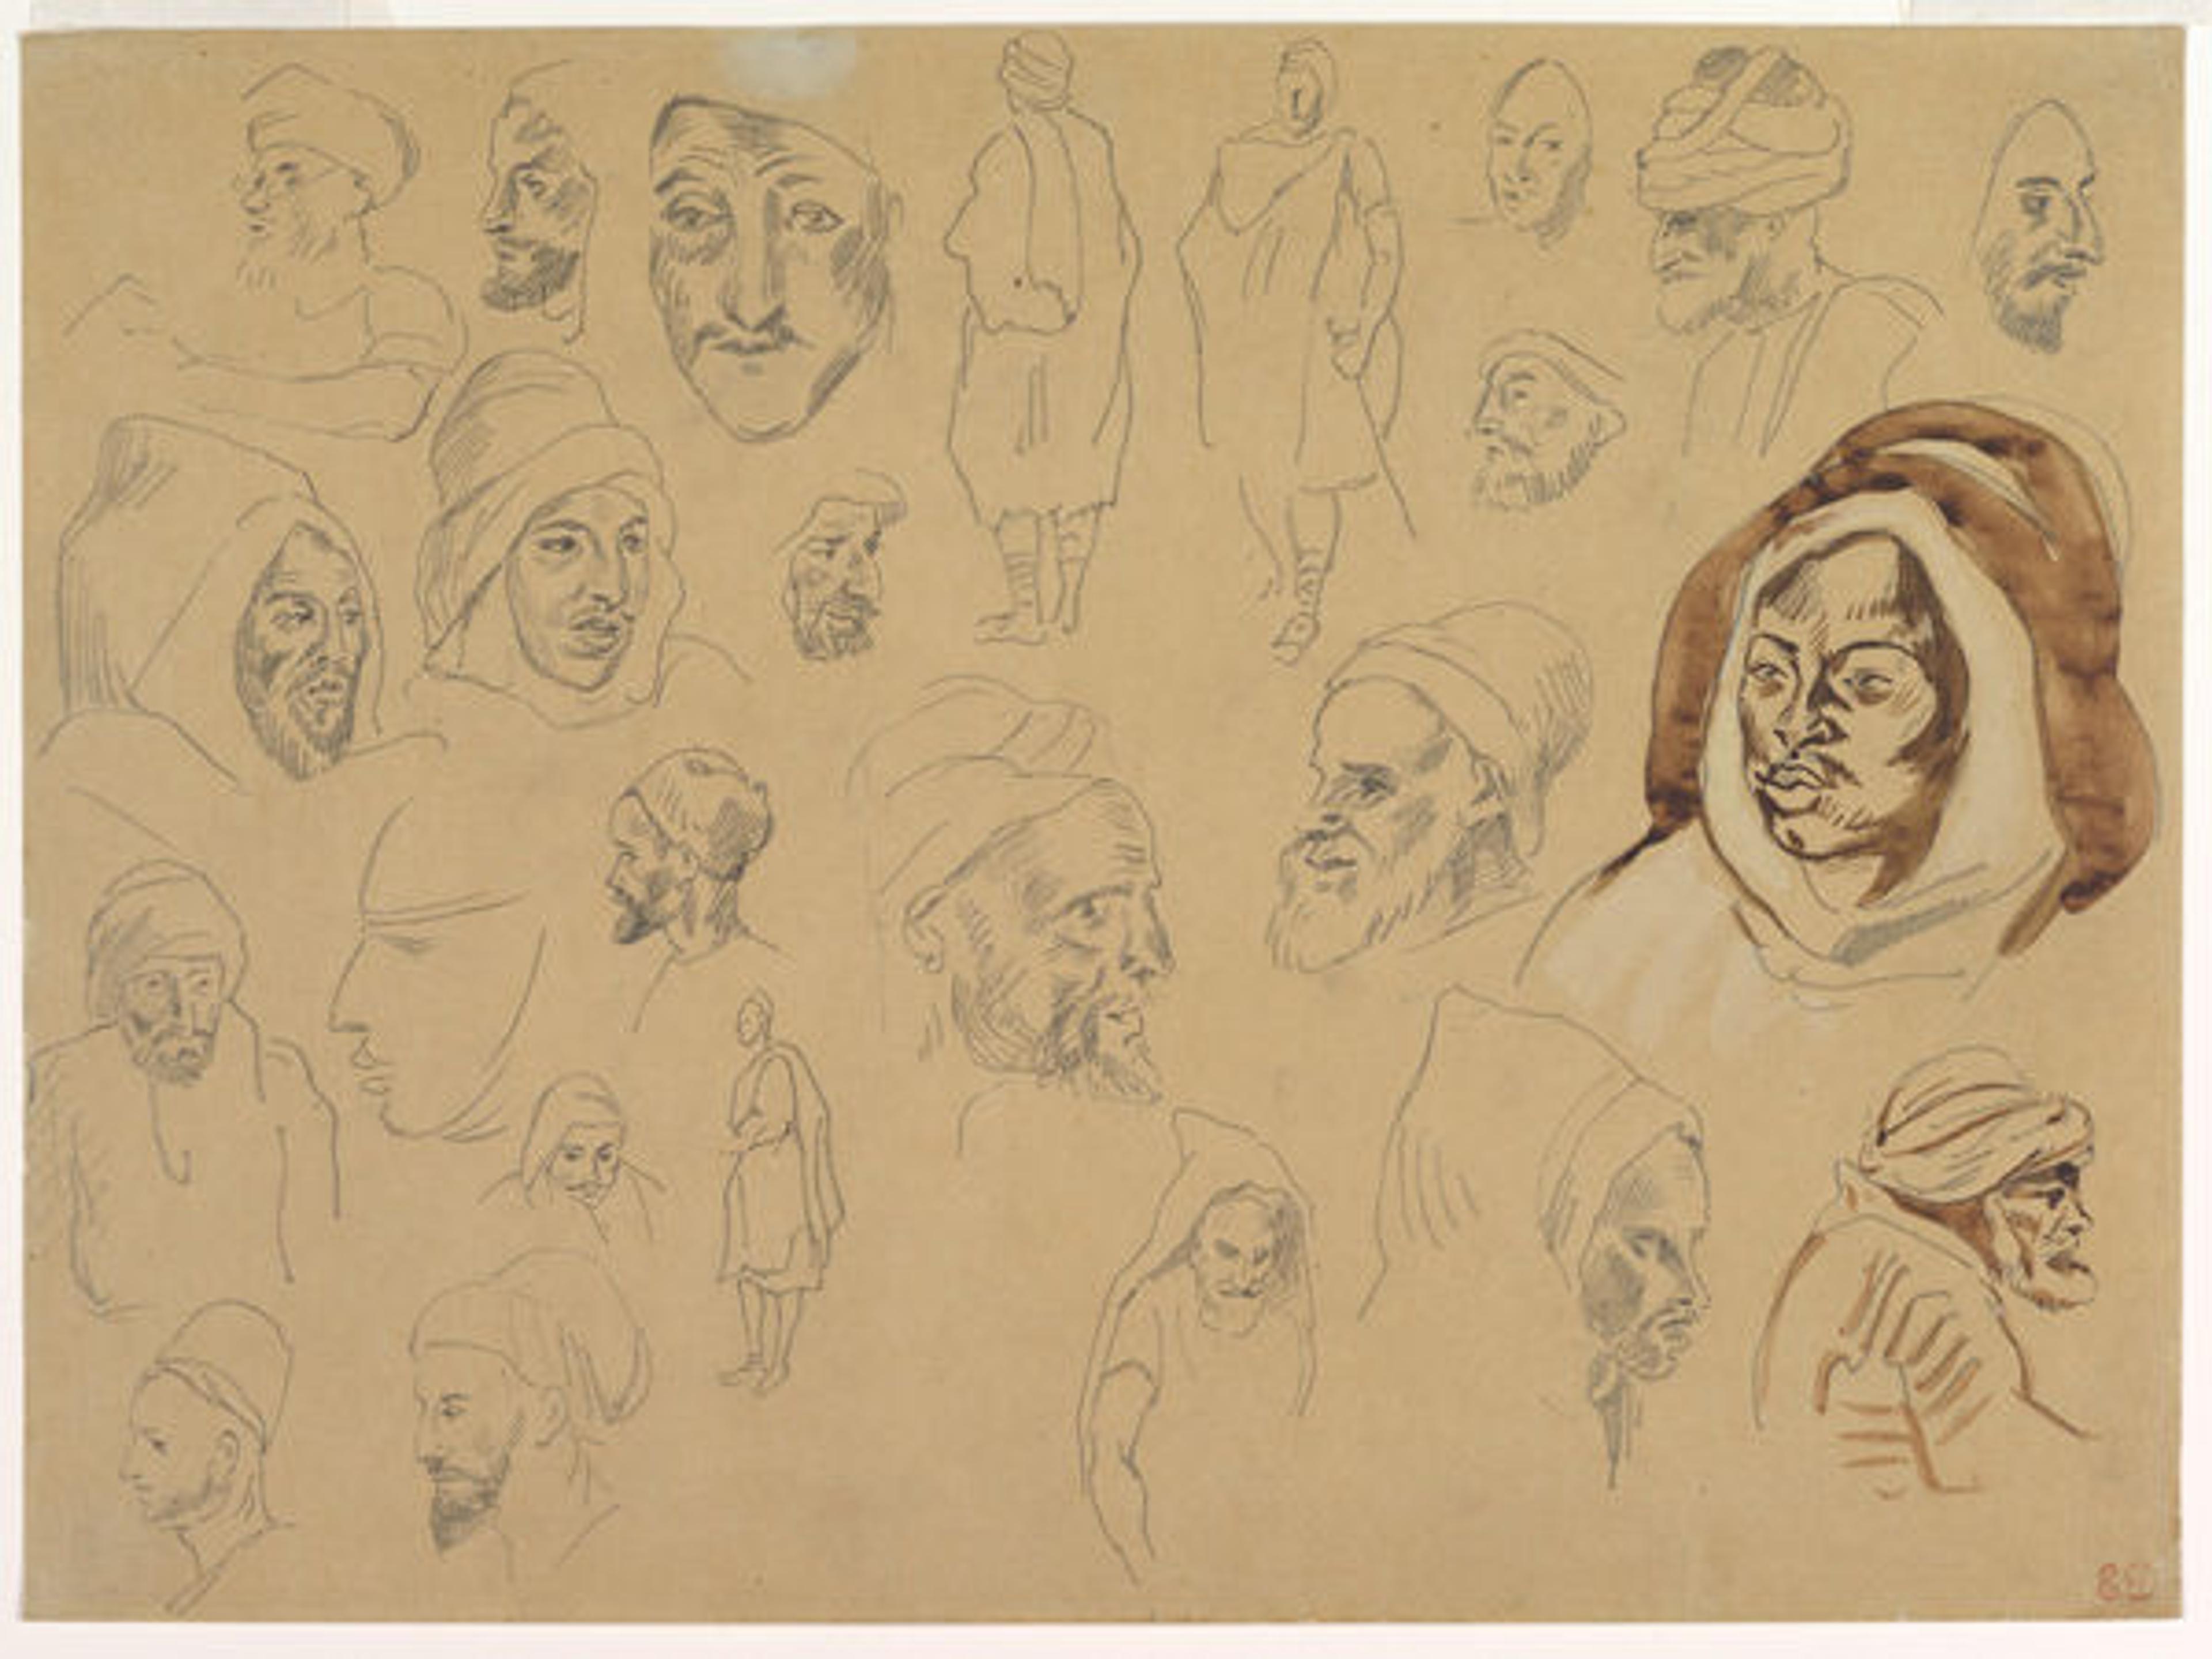 Eugène Delacroix (French, 1798–1863) | Studies of Arab Heads and Figures, 1810–63 | The Metropolitan Museum of Art, New York, Gift from the Karen B. Cohen Collection of Eugène Delacroix, in honor of Philippe de Montebello upon the occasion of his twenty-fifth year as Director of The Metropolitan Museum of Art (2013.1135.26)